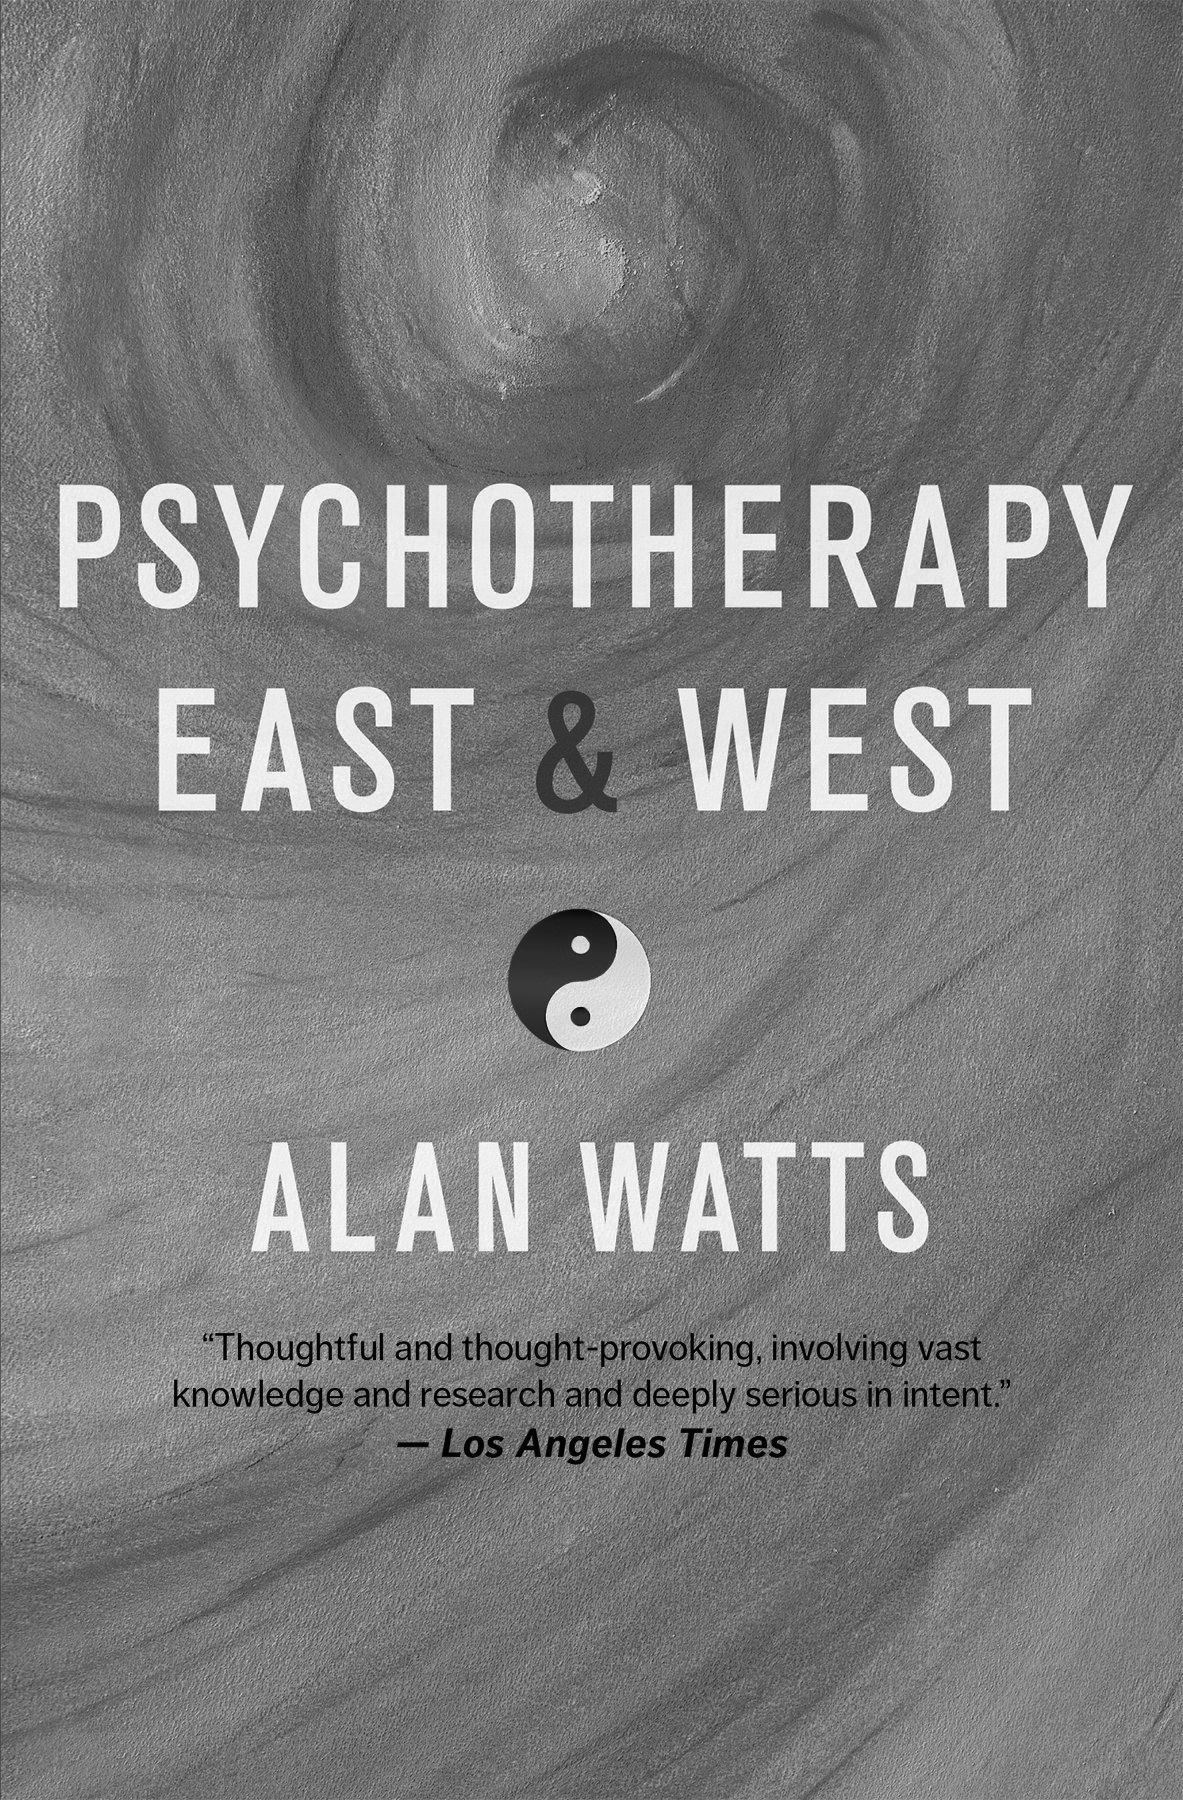 Psychotherapy East & West.jpg